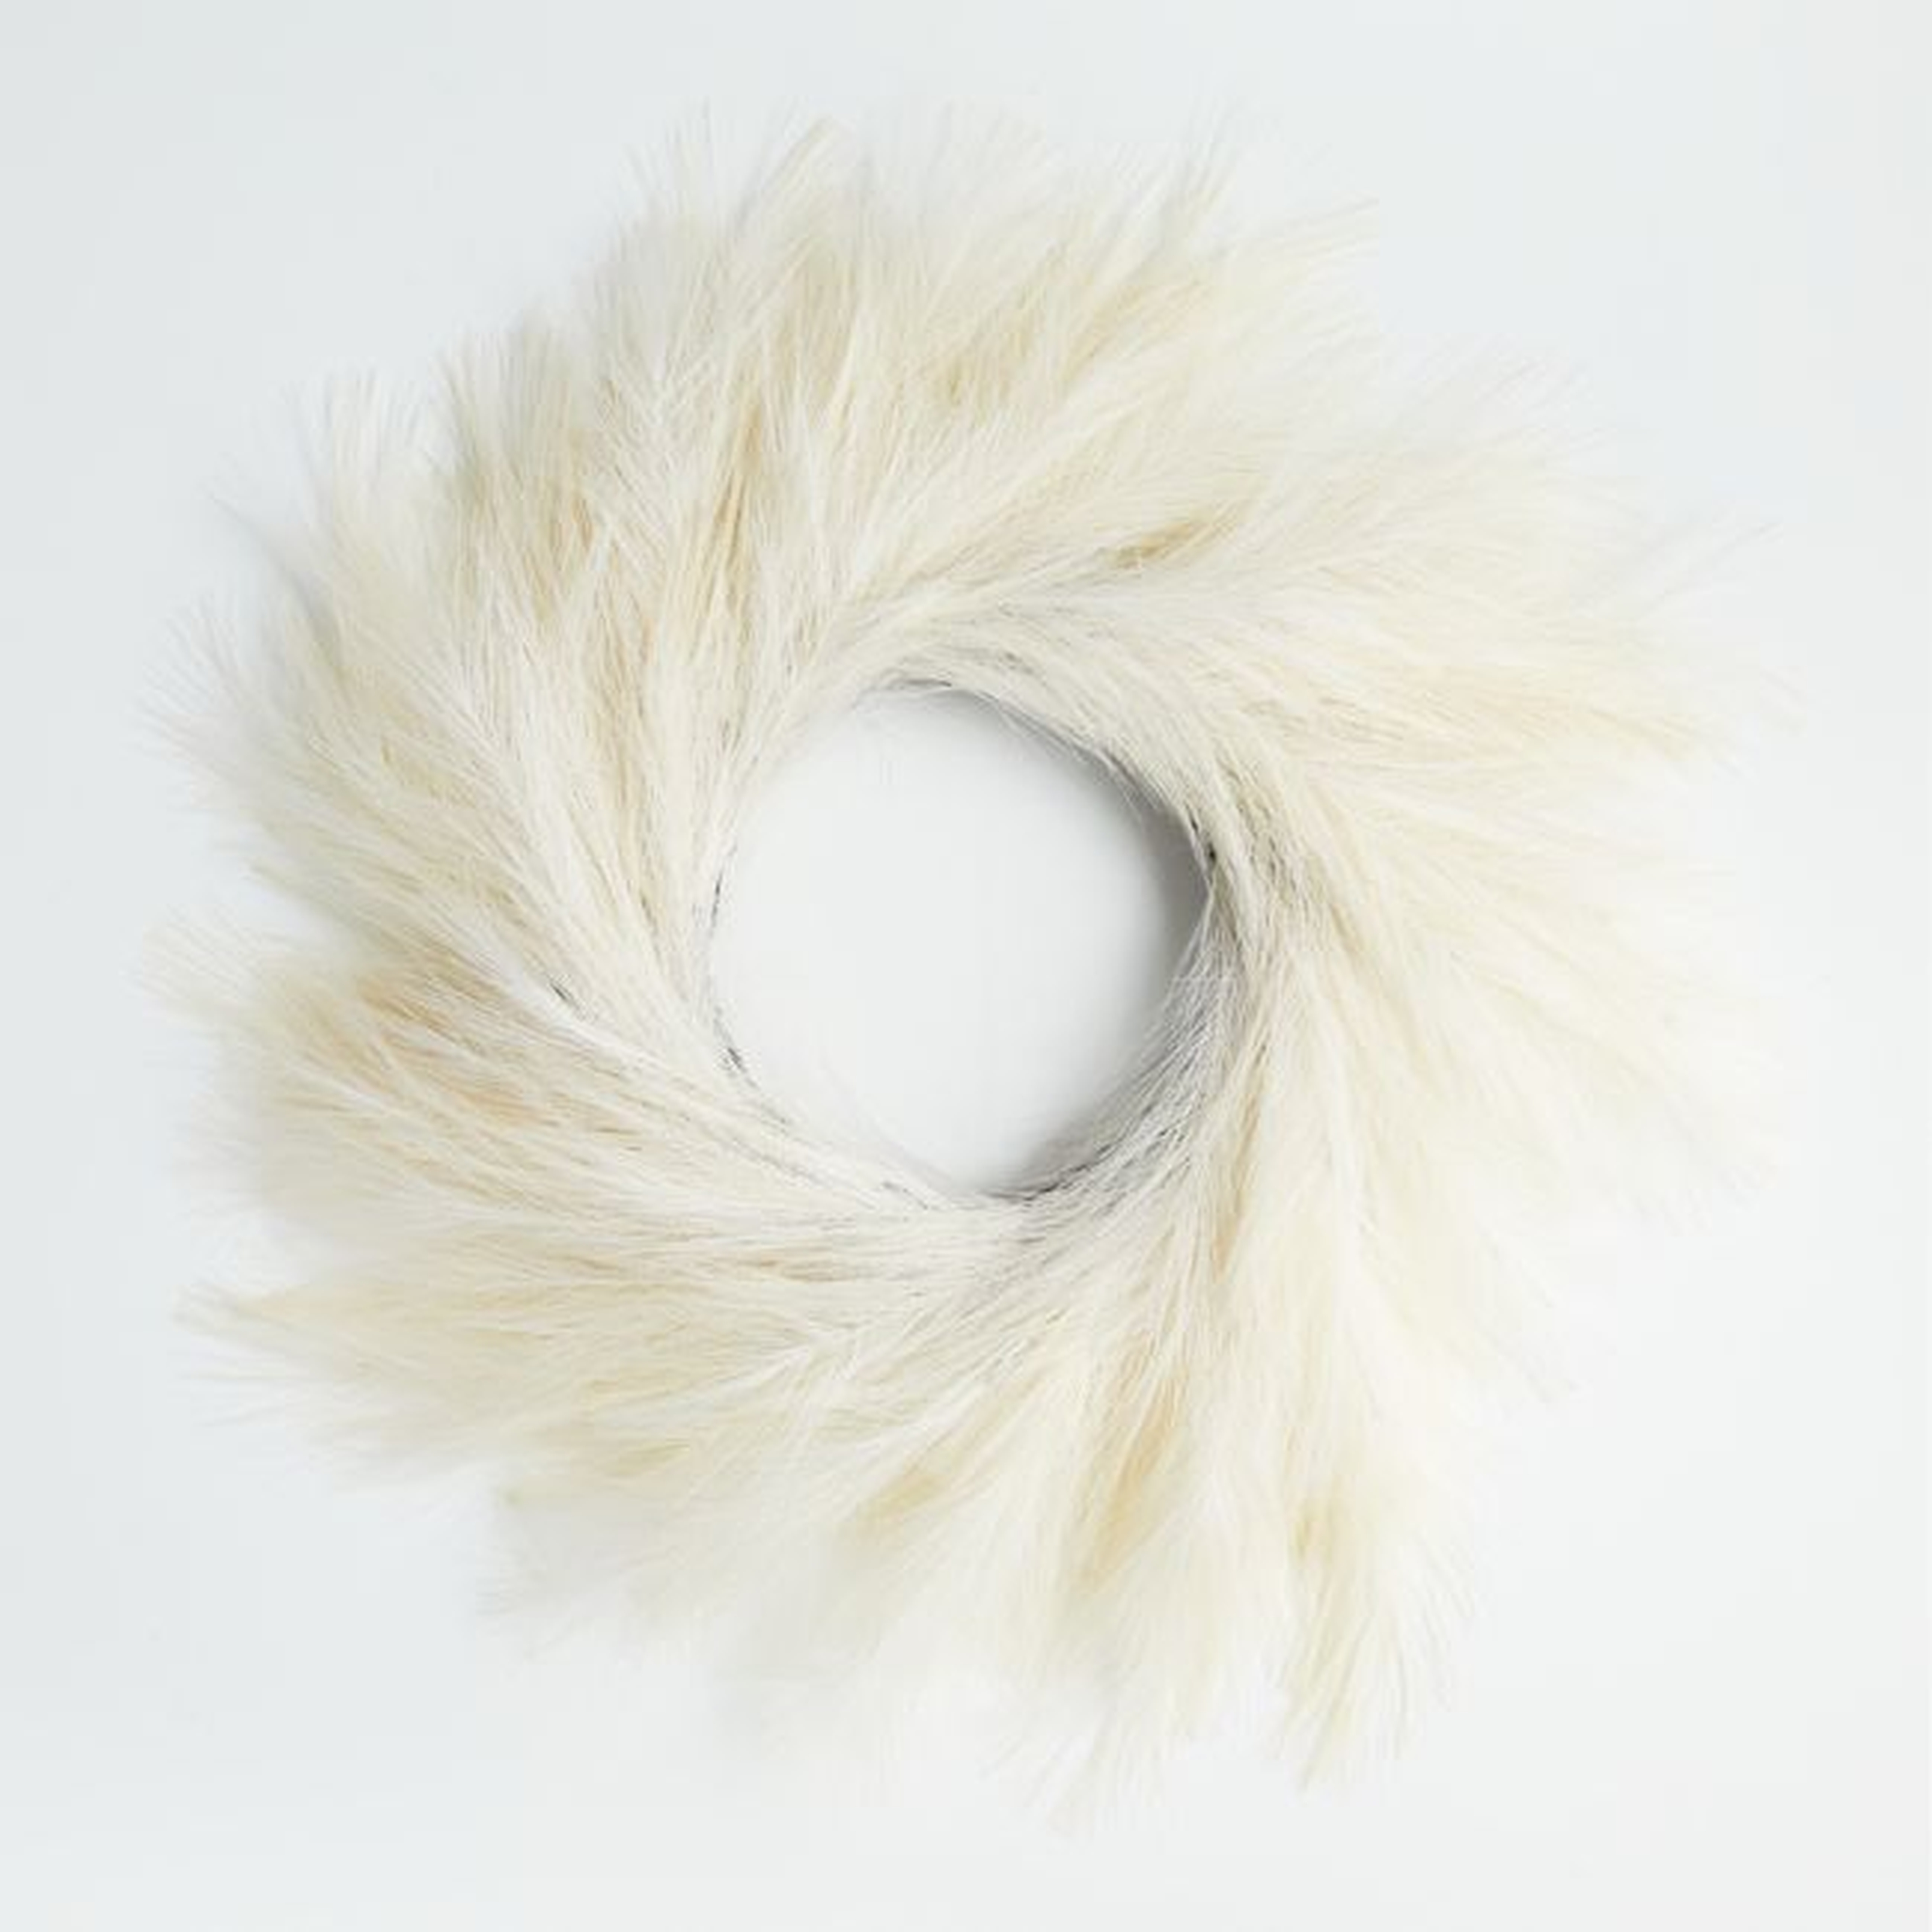 Faux Ivory Pampas Grass Wreath 28" - Crate and Barrel